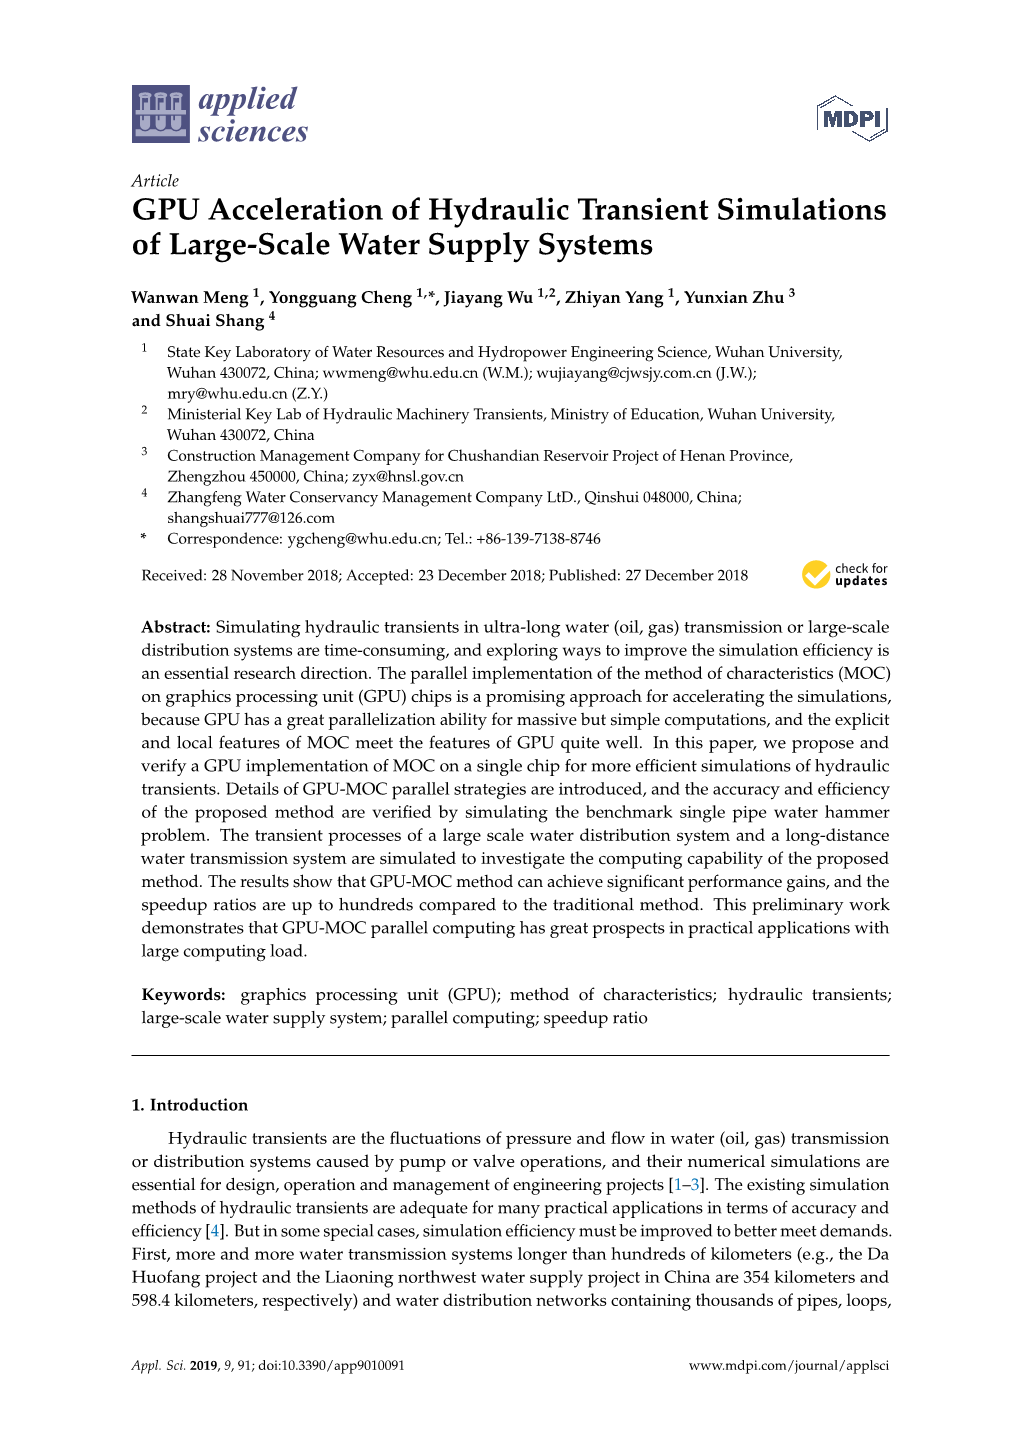 GPU Acceleration of Hydraulic Transient Simulations of Large-Scale Water Supply Systems